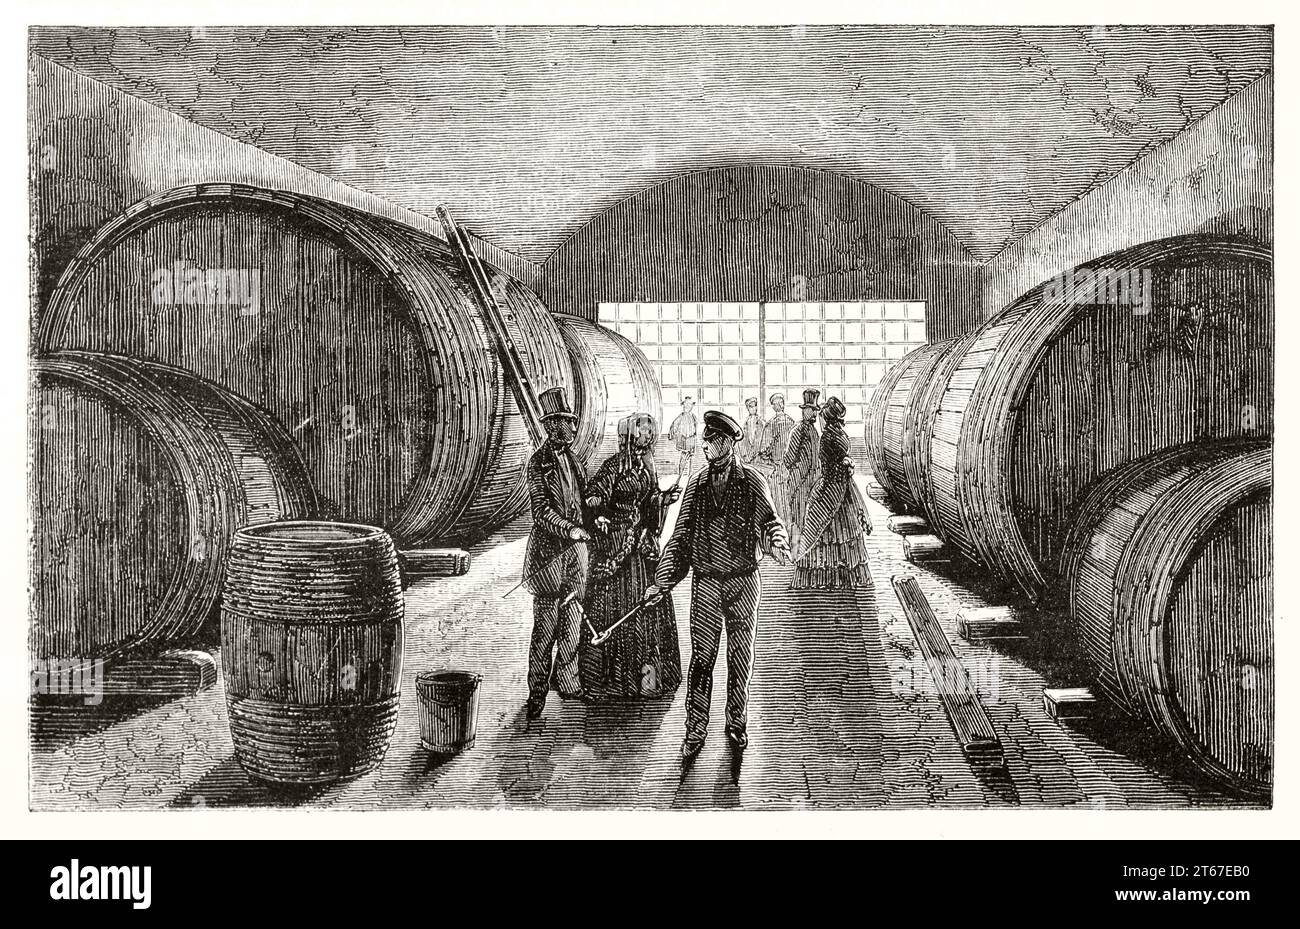 Old illustration of vat cellar for Champagne wine. By unidentified author, publ. on Magasin Pittoresque, Paris, 1851 Stock Photo